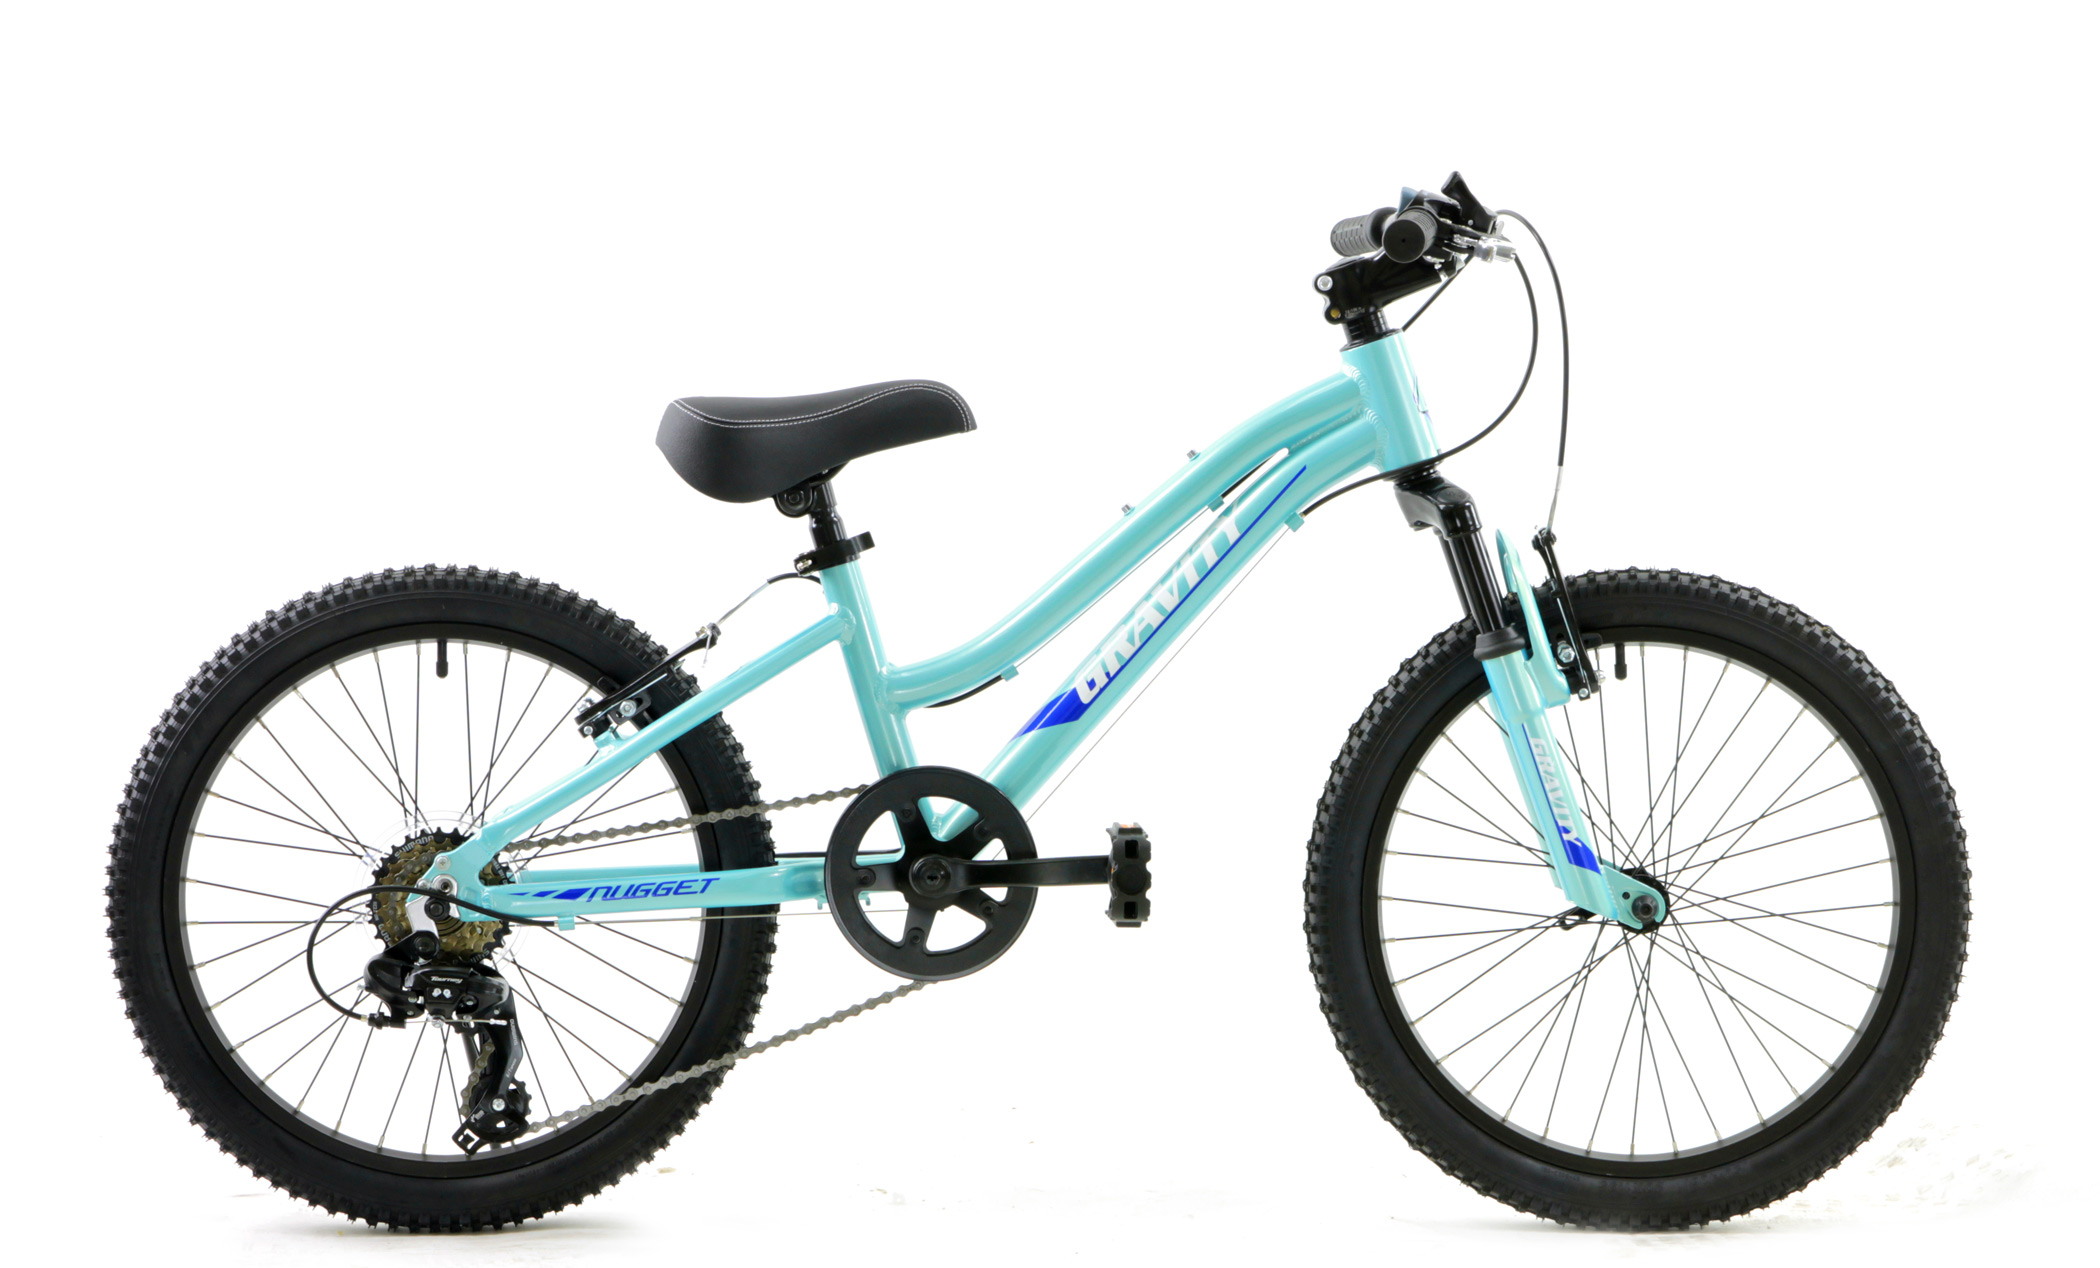  Gravity Nugget 20 Shimano Multi Speed Front Suspension Kids Mountain Bikes for Lil' Riders Image